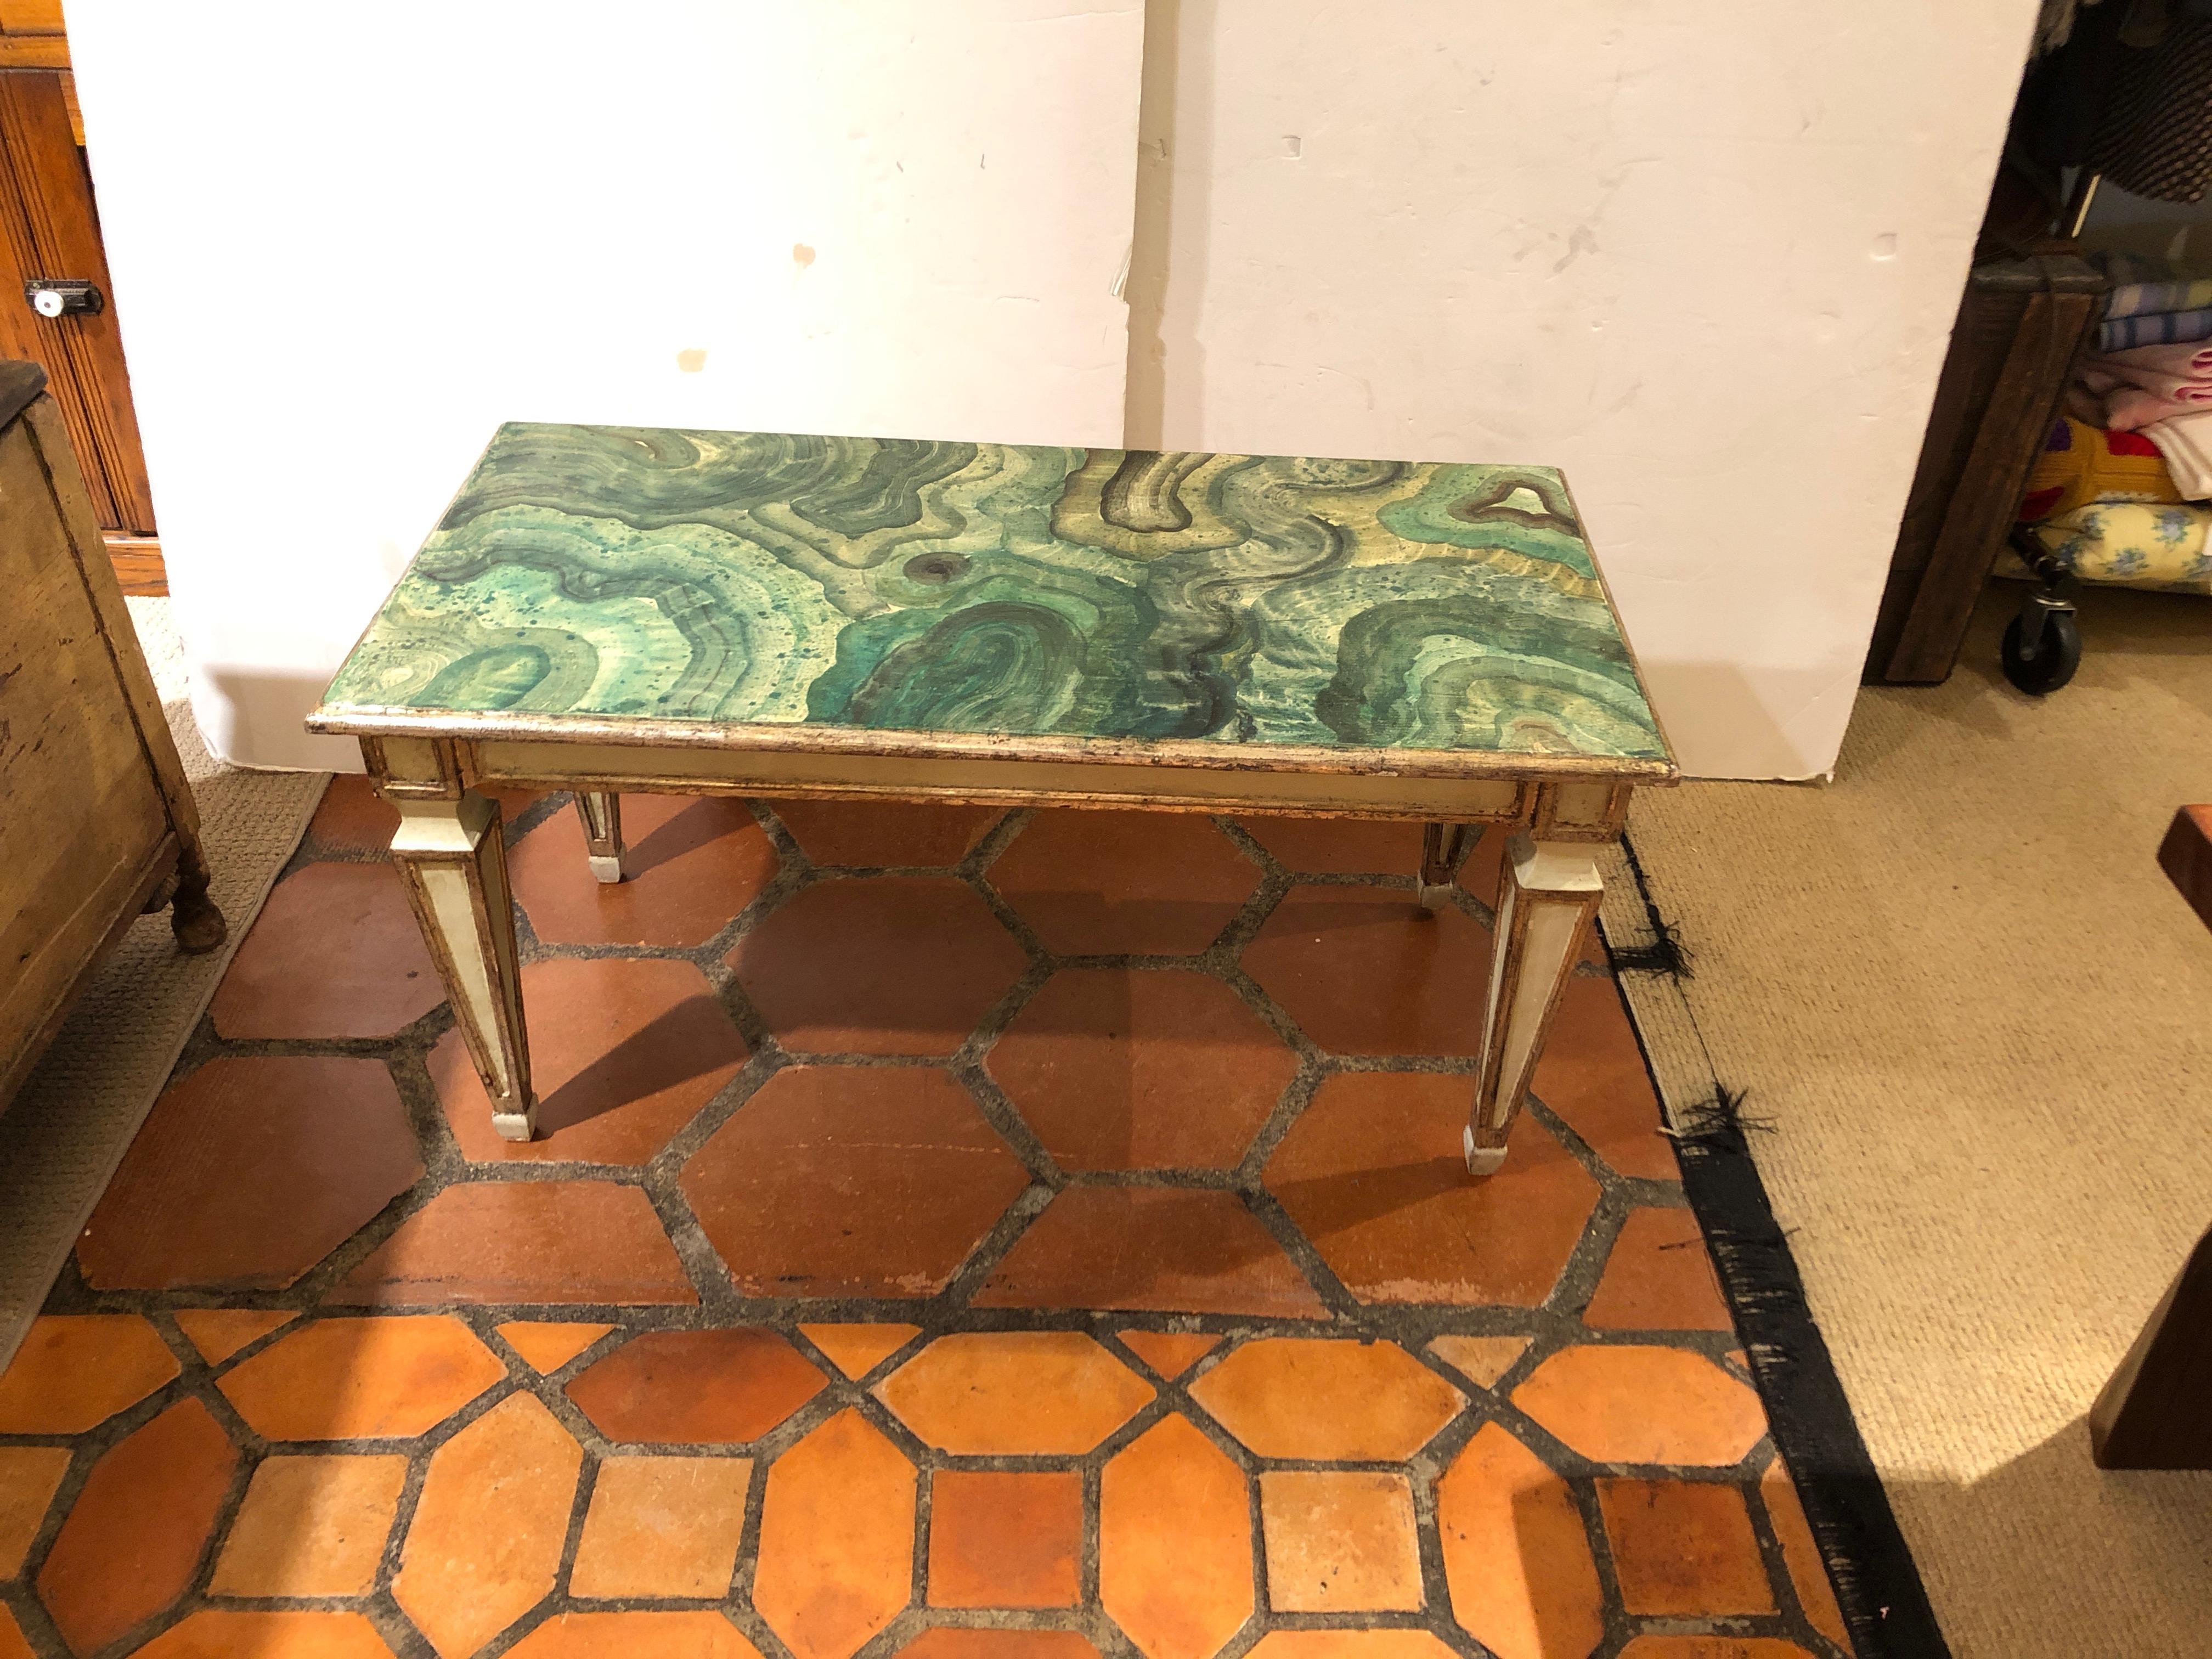 Chic rectangular Italian vintage coffee table hand-painted with a striking green faux malachite top, and grey with silver gilt detailing on the base.